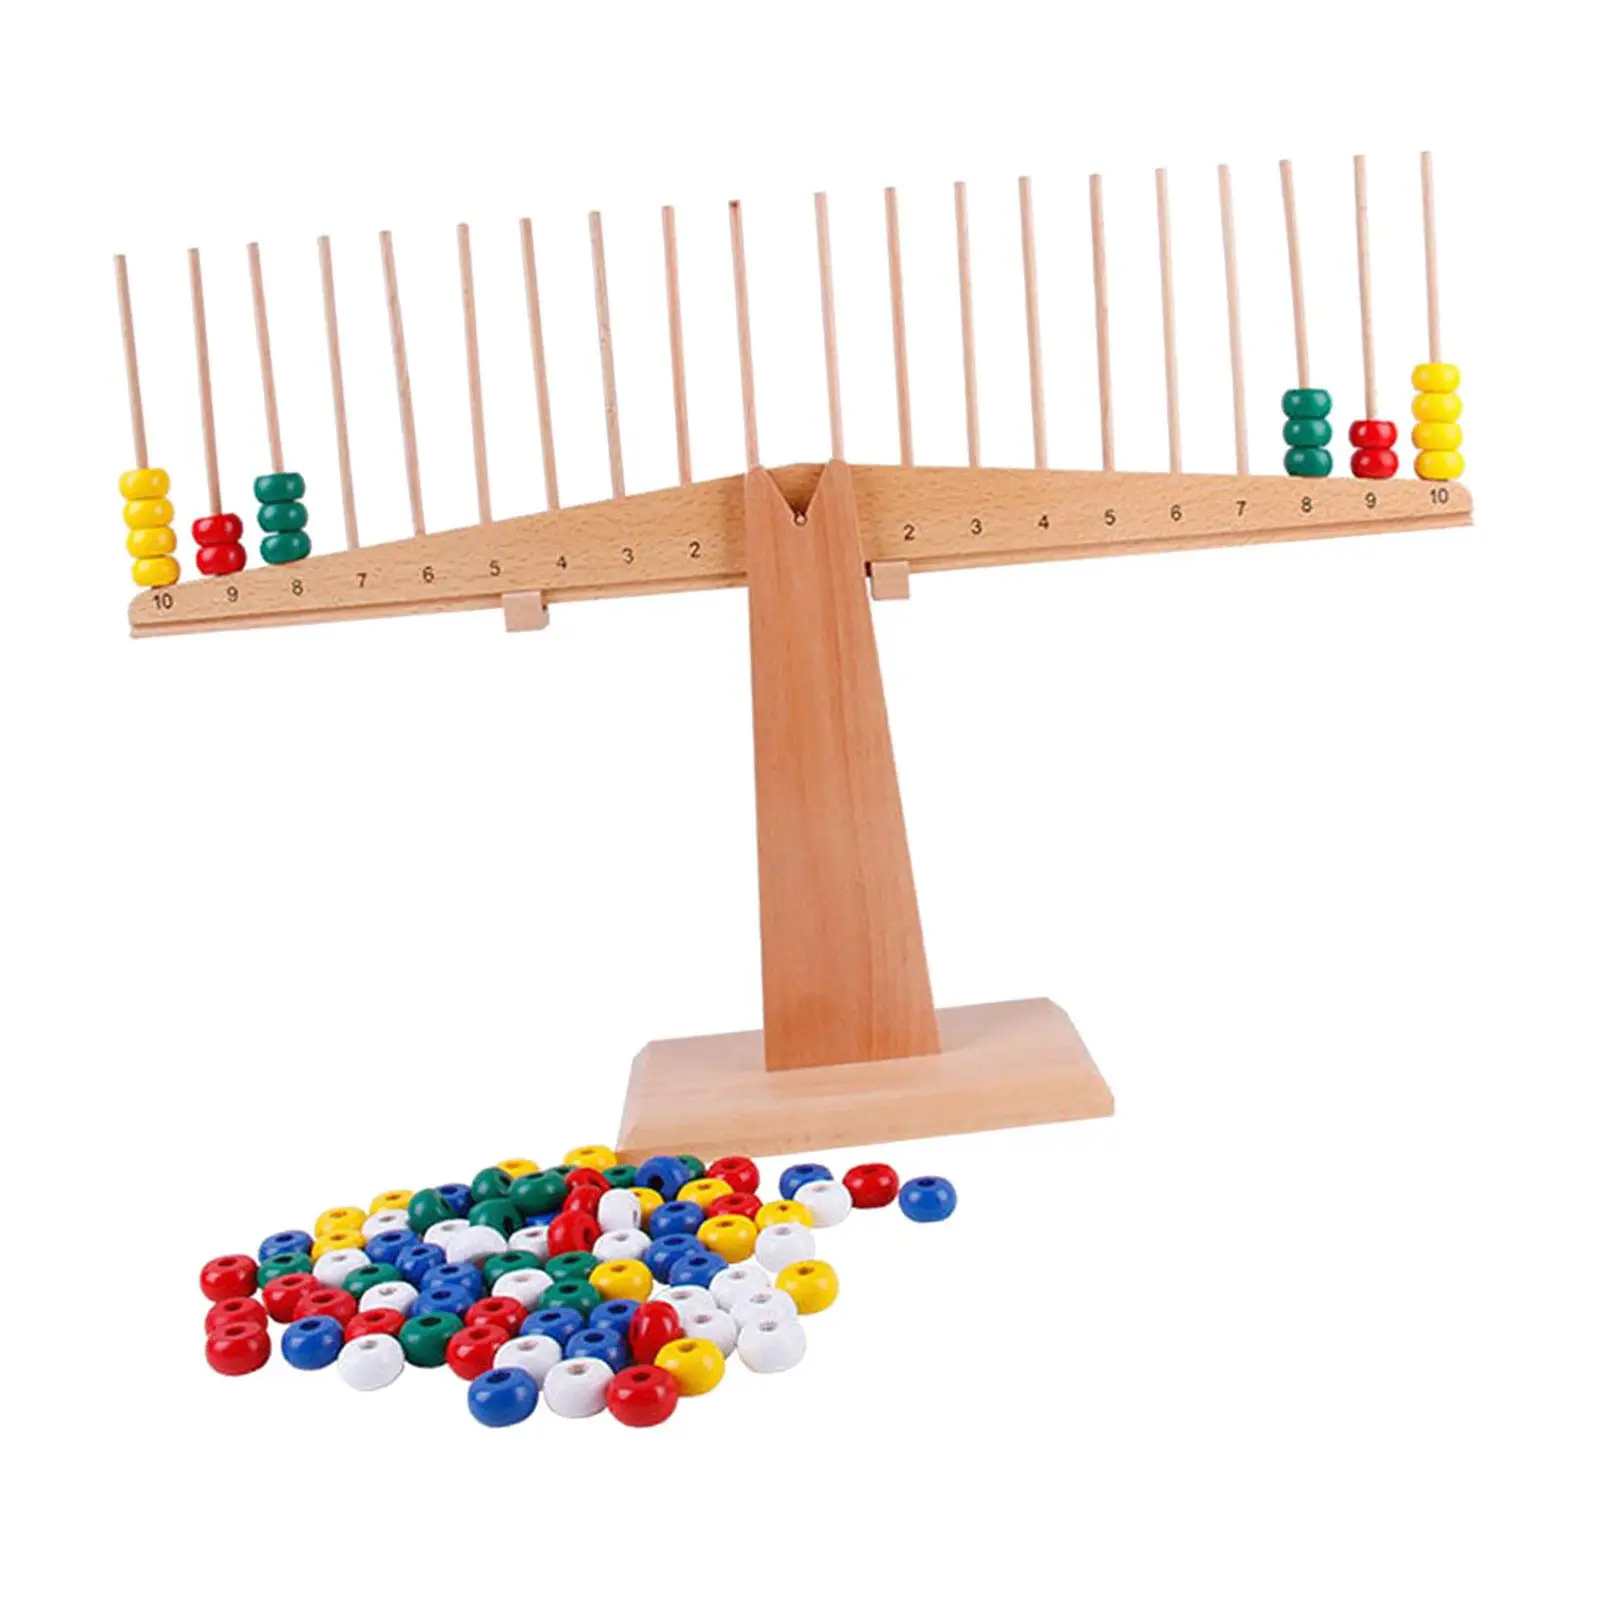 Wooden Balance Counting Toys Interactive Visual Perception Skills Educational Toy for Baby New Year Gift Ages 3 4 5 Year Old